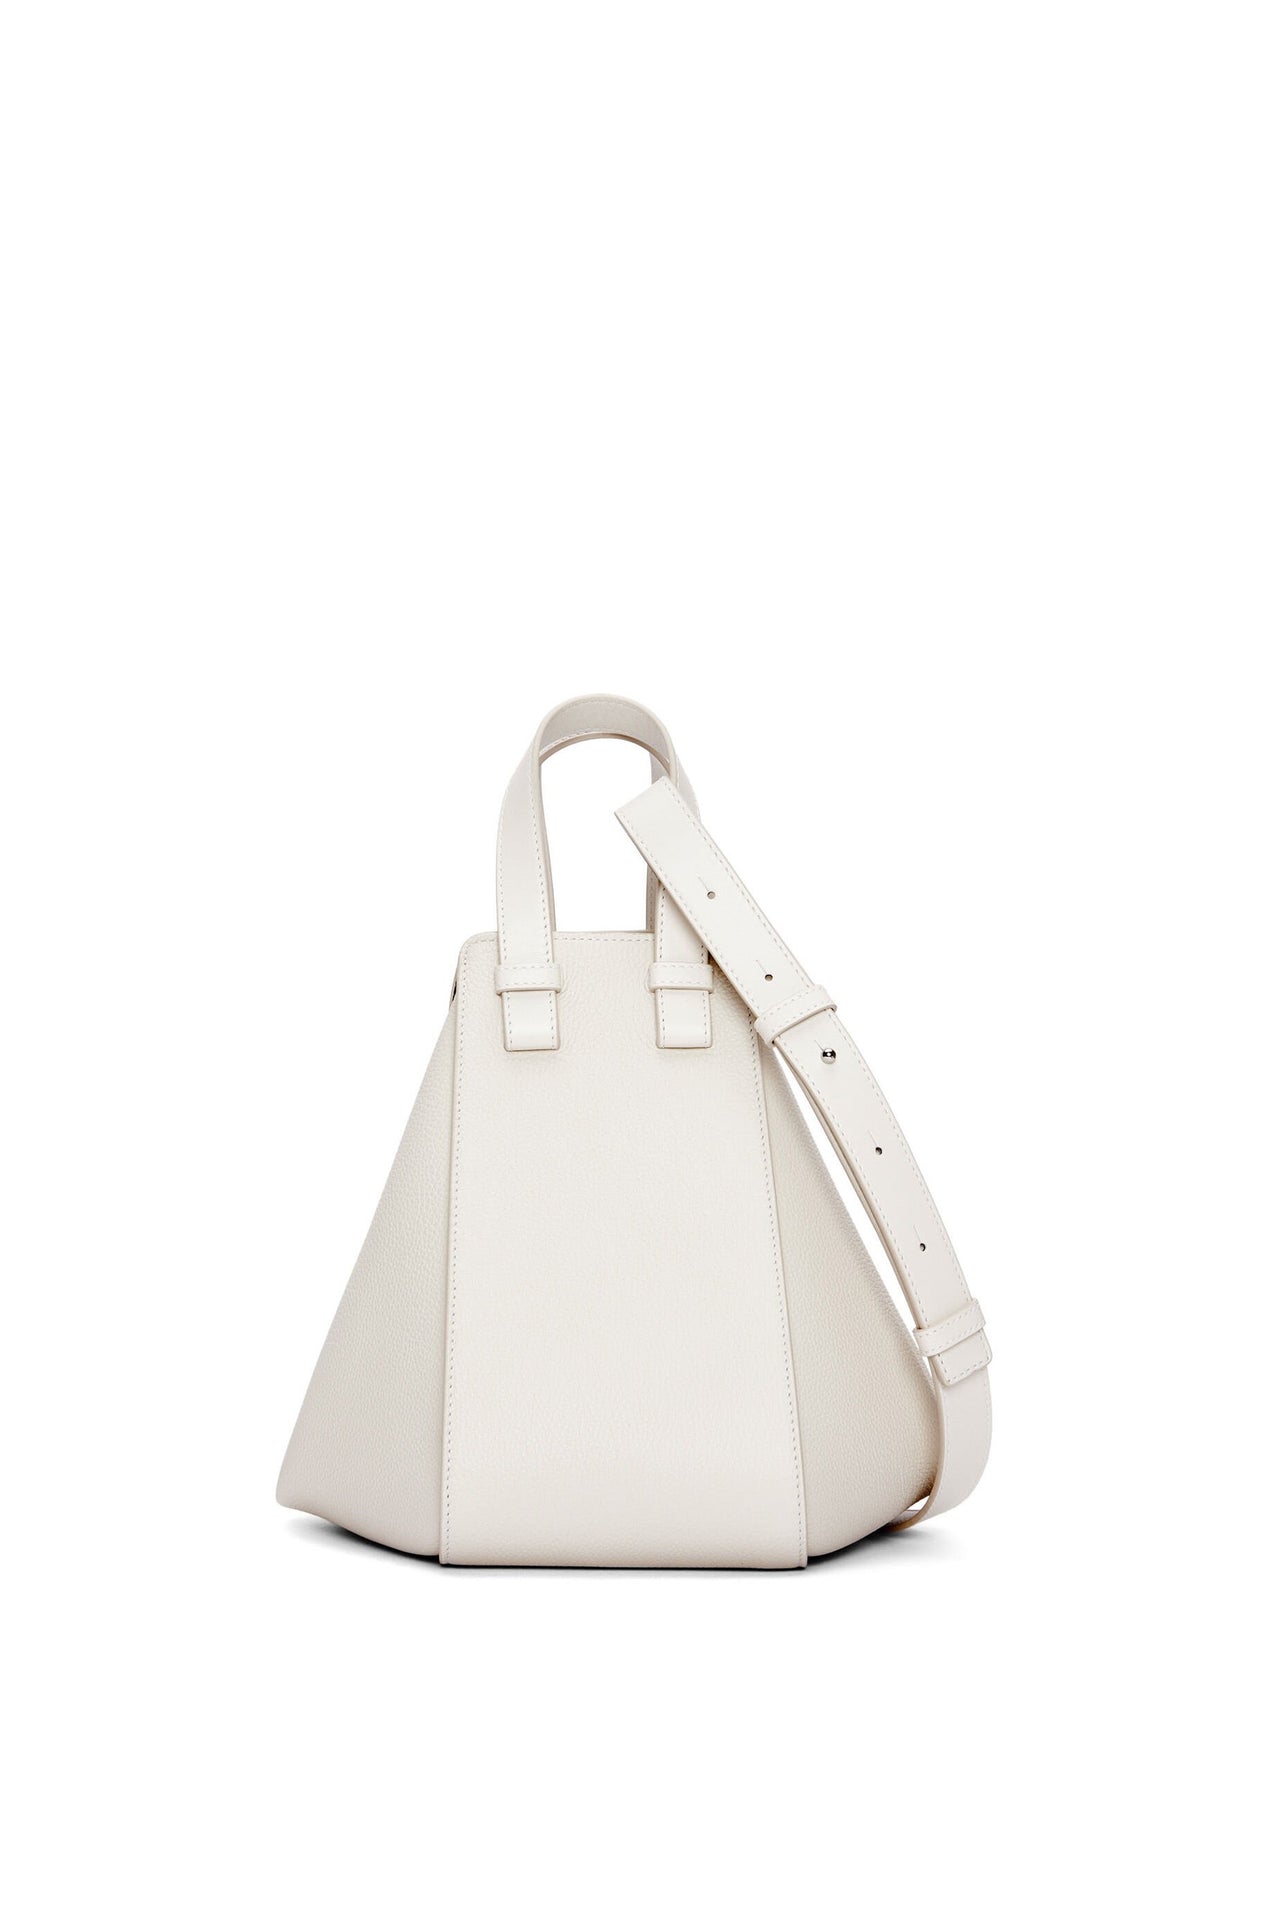 Loewe Small Hammock bag in soft grained calfskin (Colour:  Soft White No. 1)